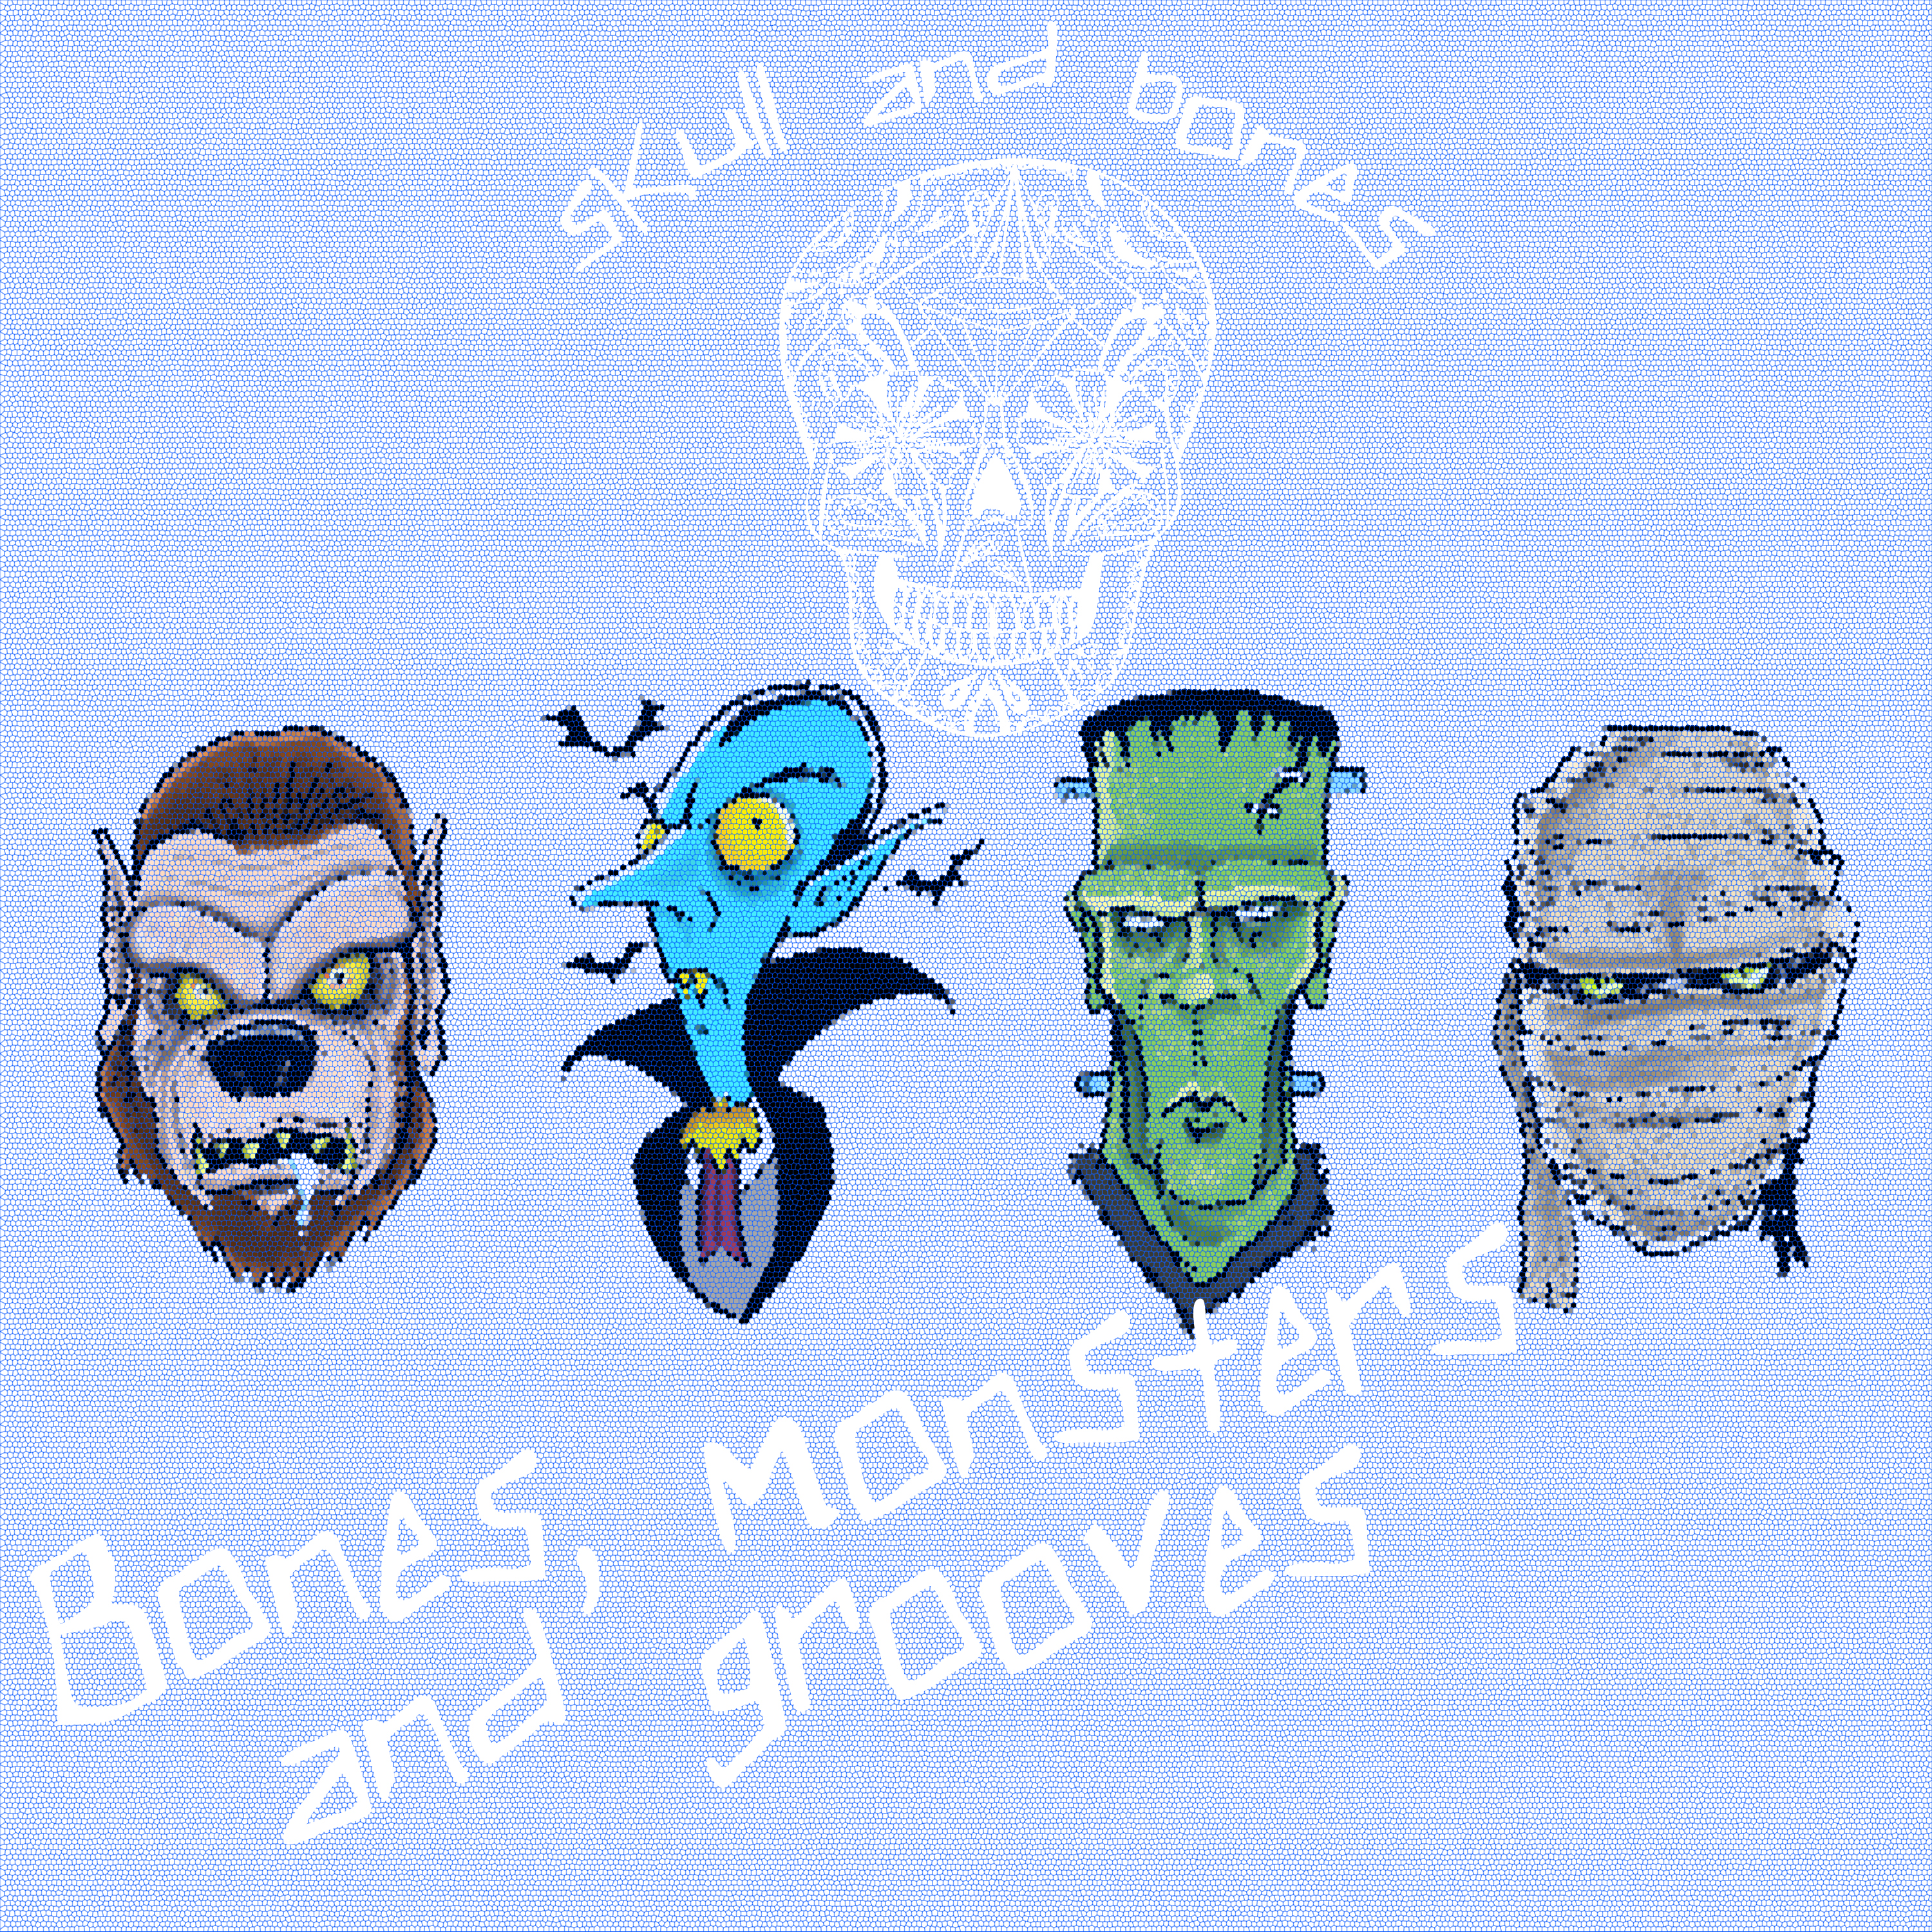 Bones, Monsters and Grooves